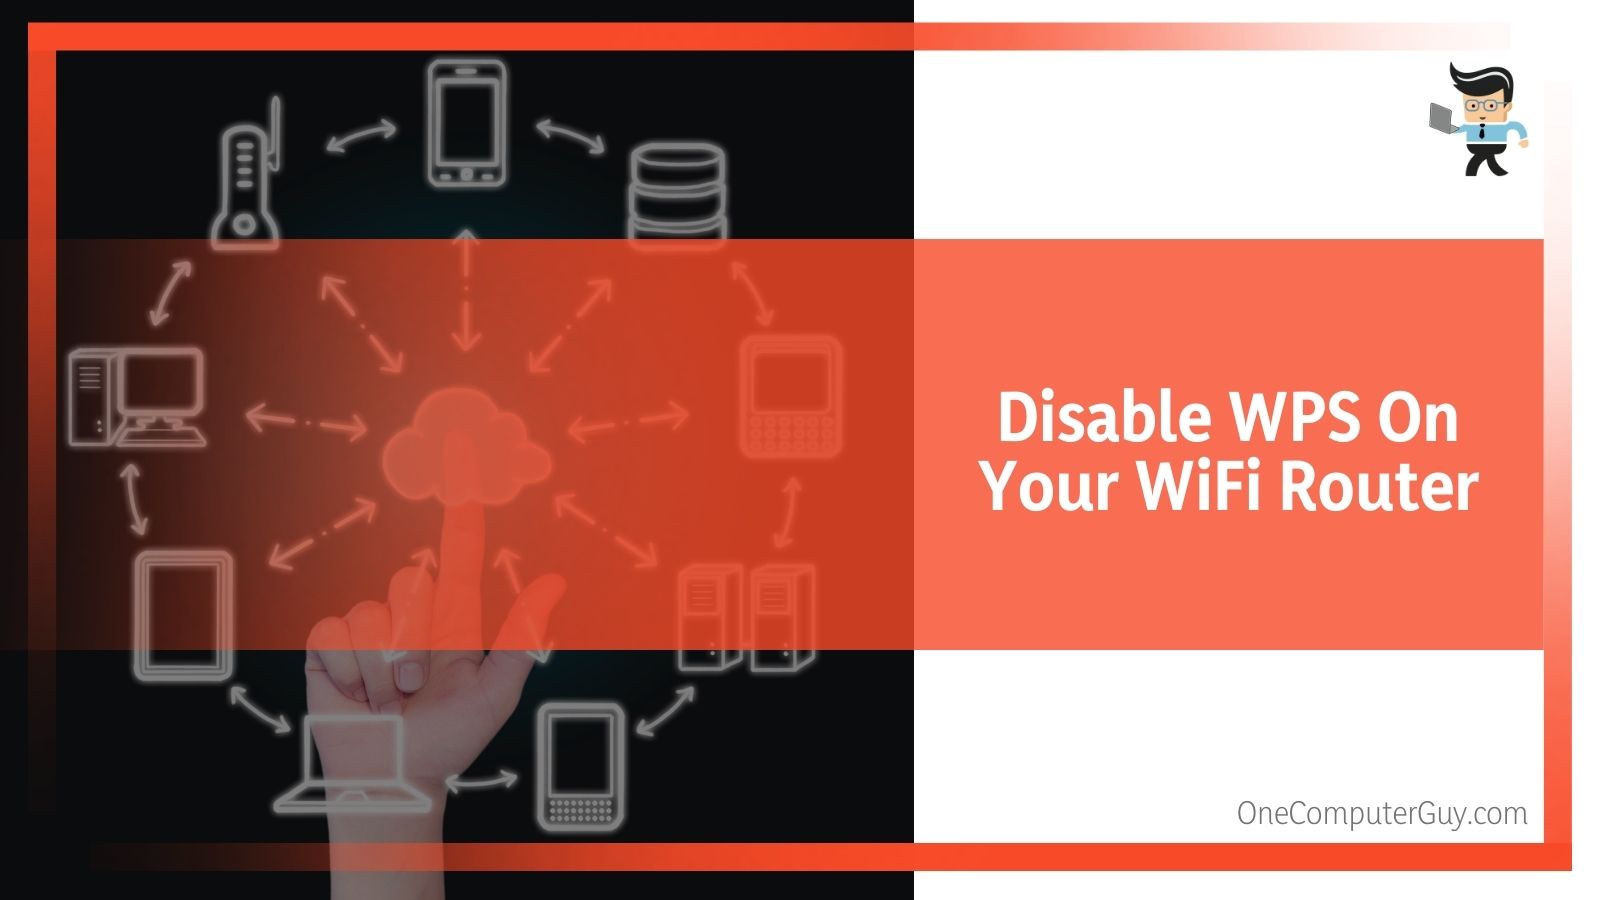 Disable WPS On Your WiFi Router